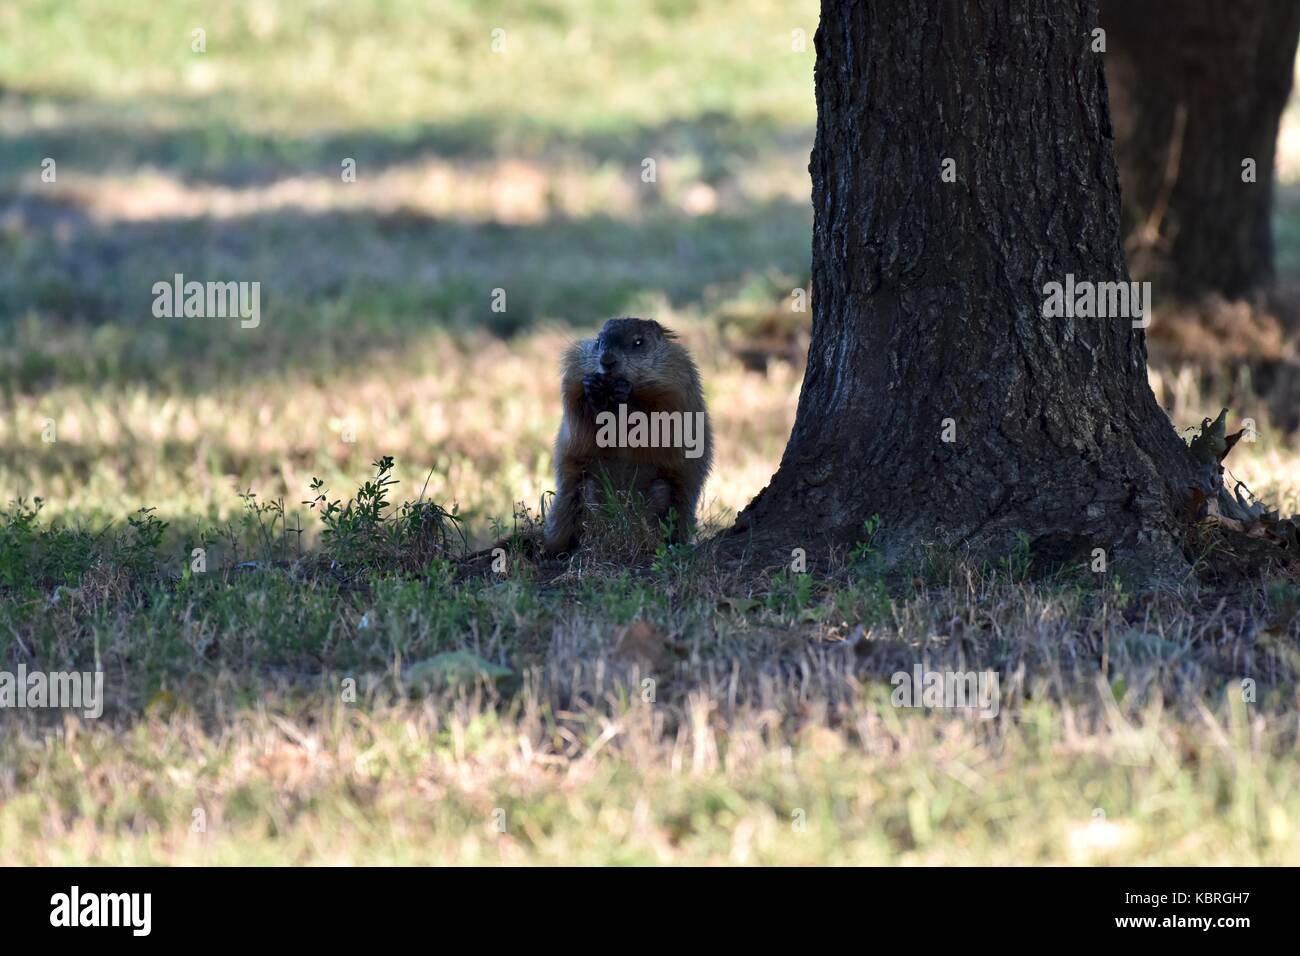 Groundhog (Marmota monax), also known as woodchuck eating while standing up Stock Photo